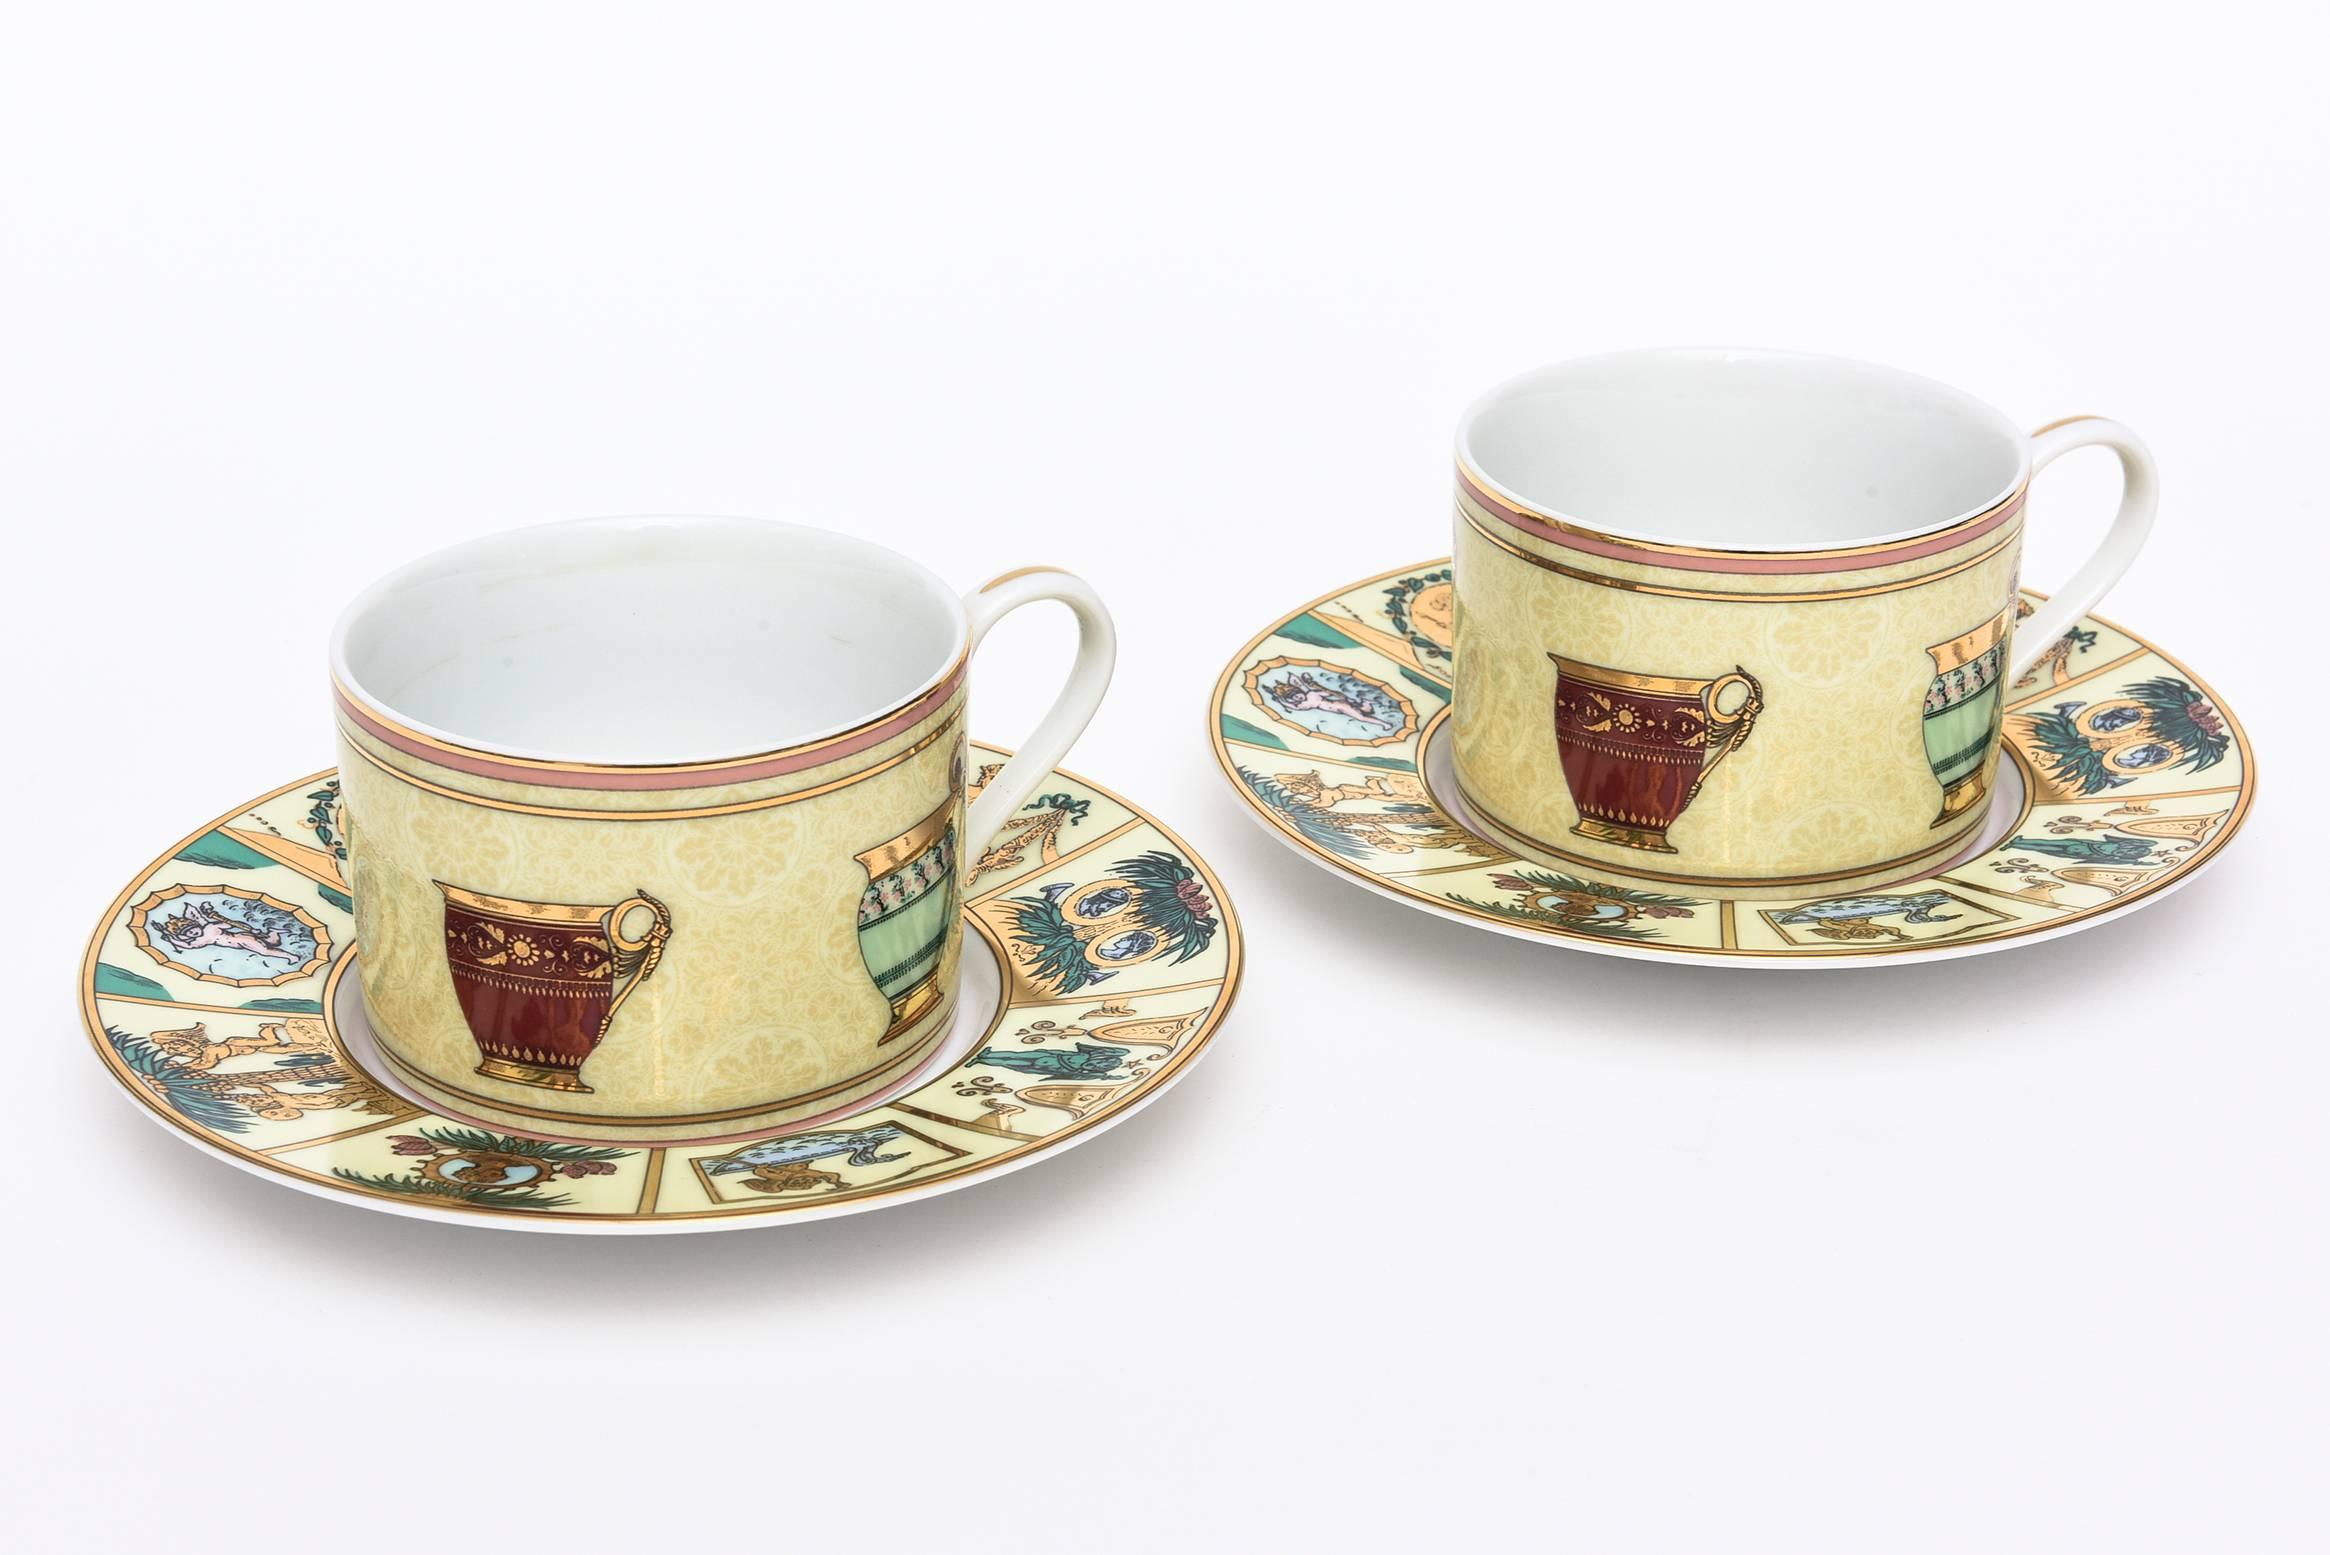 What a way to be served coffee or tea! This pair of Gucci original porcelain Greek mythological coffee/tea service for two has beautiful renditions of symbols in a great array of colors.